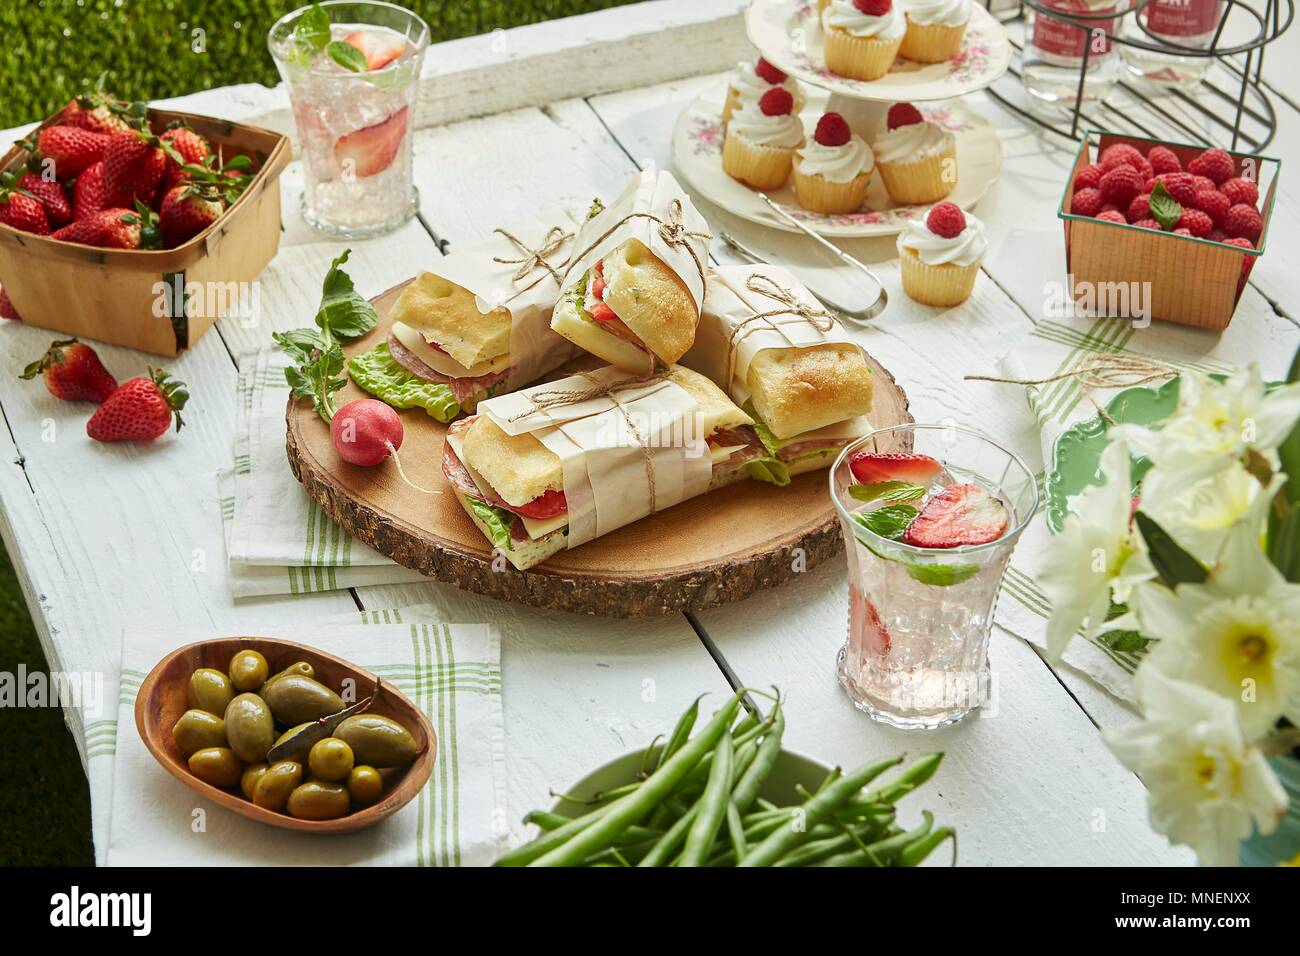 Sandwiches, salads, fruit and cupcakes for a picnic Stock Photo